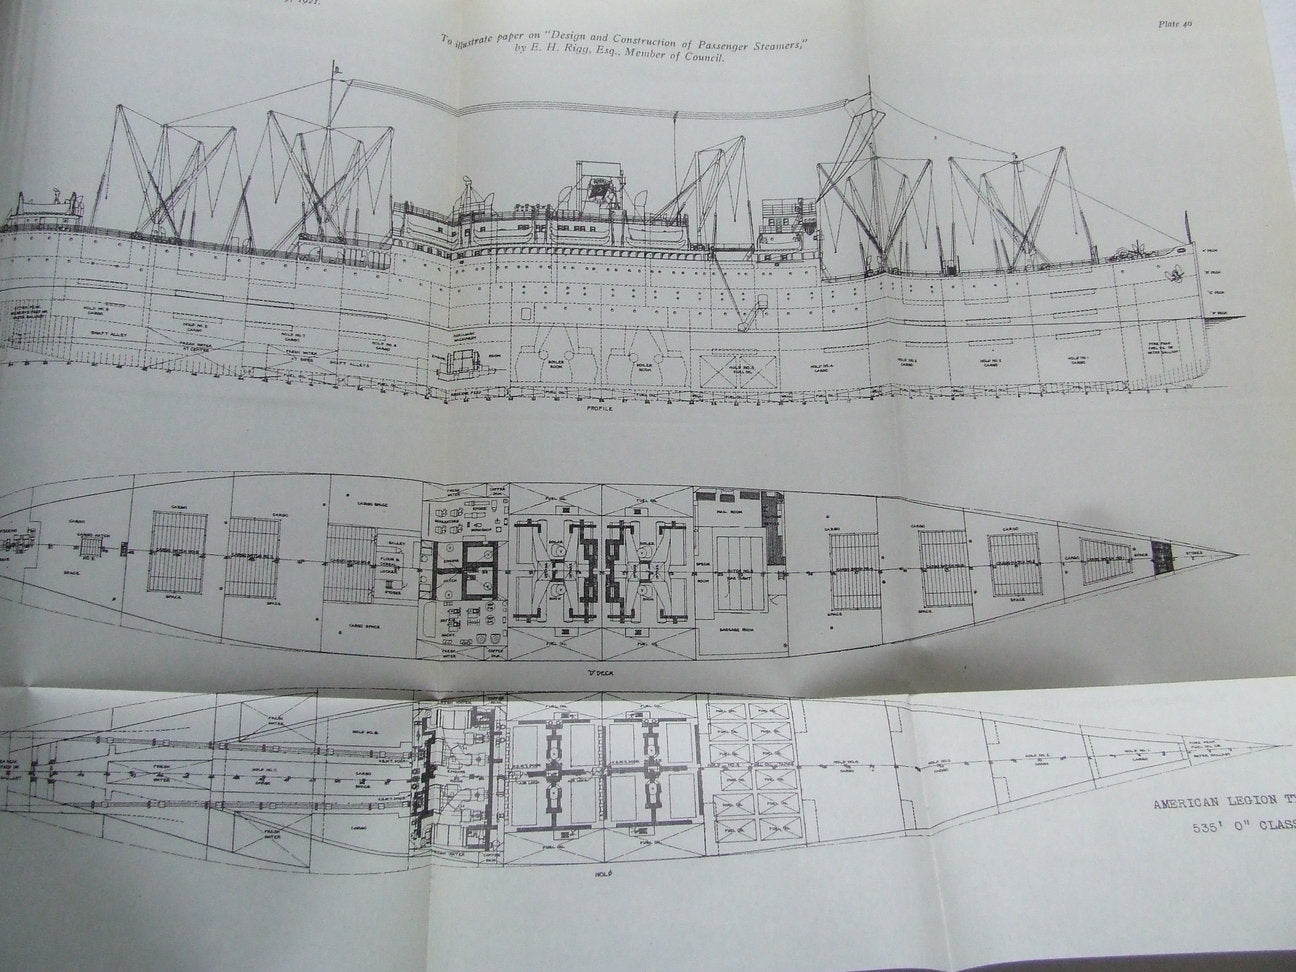 Design and Construction of Passenger Steamers